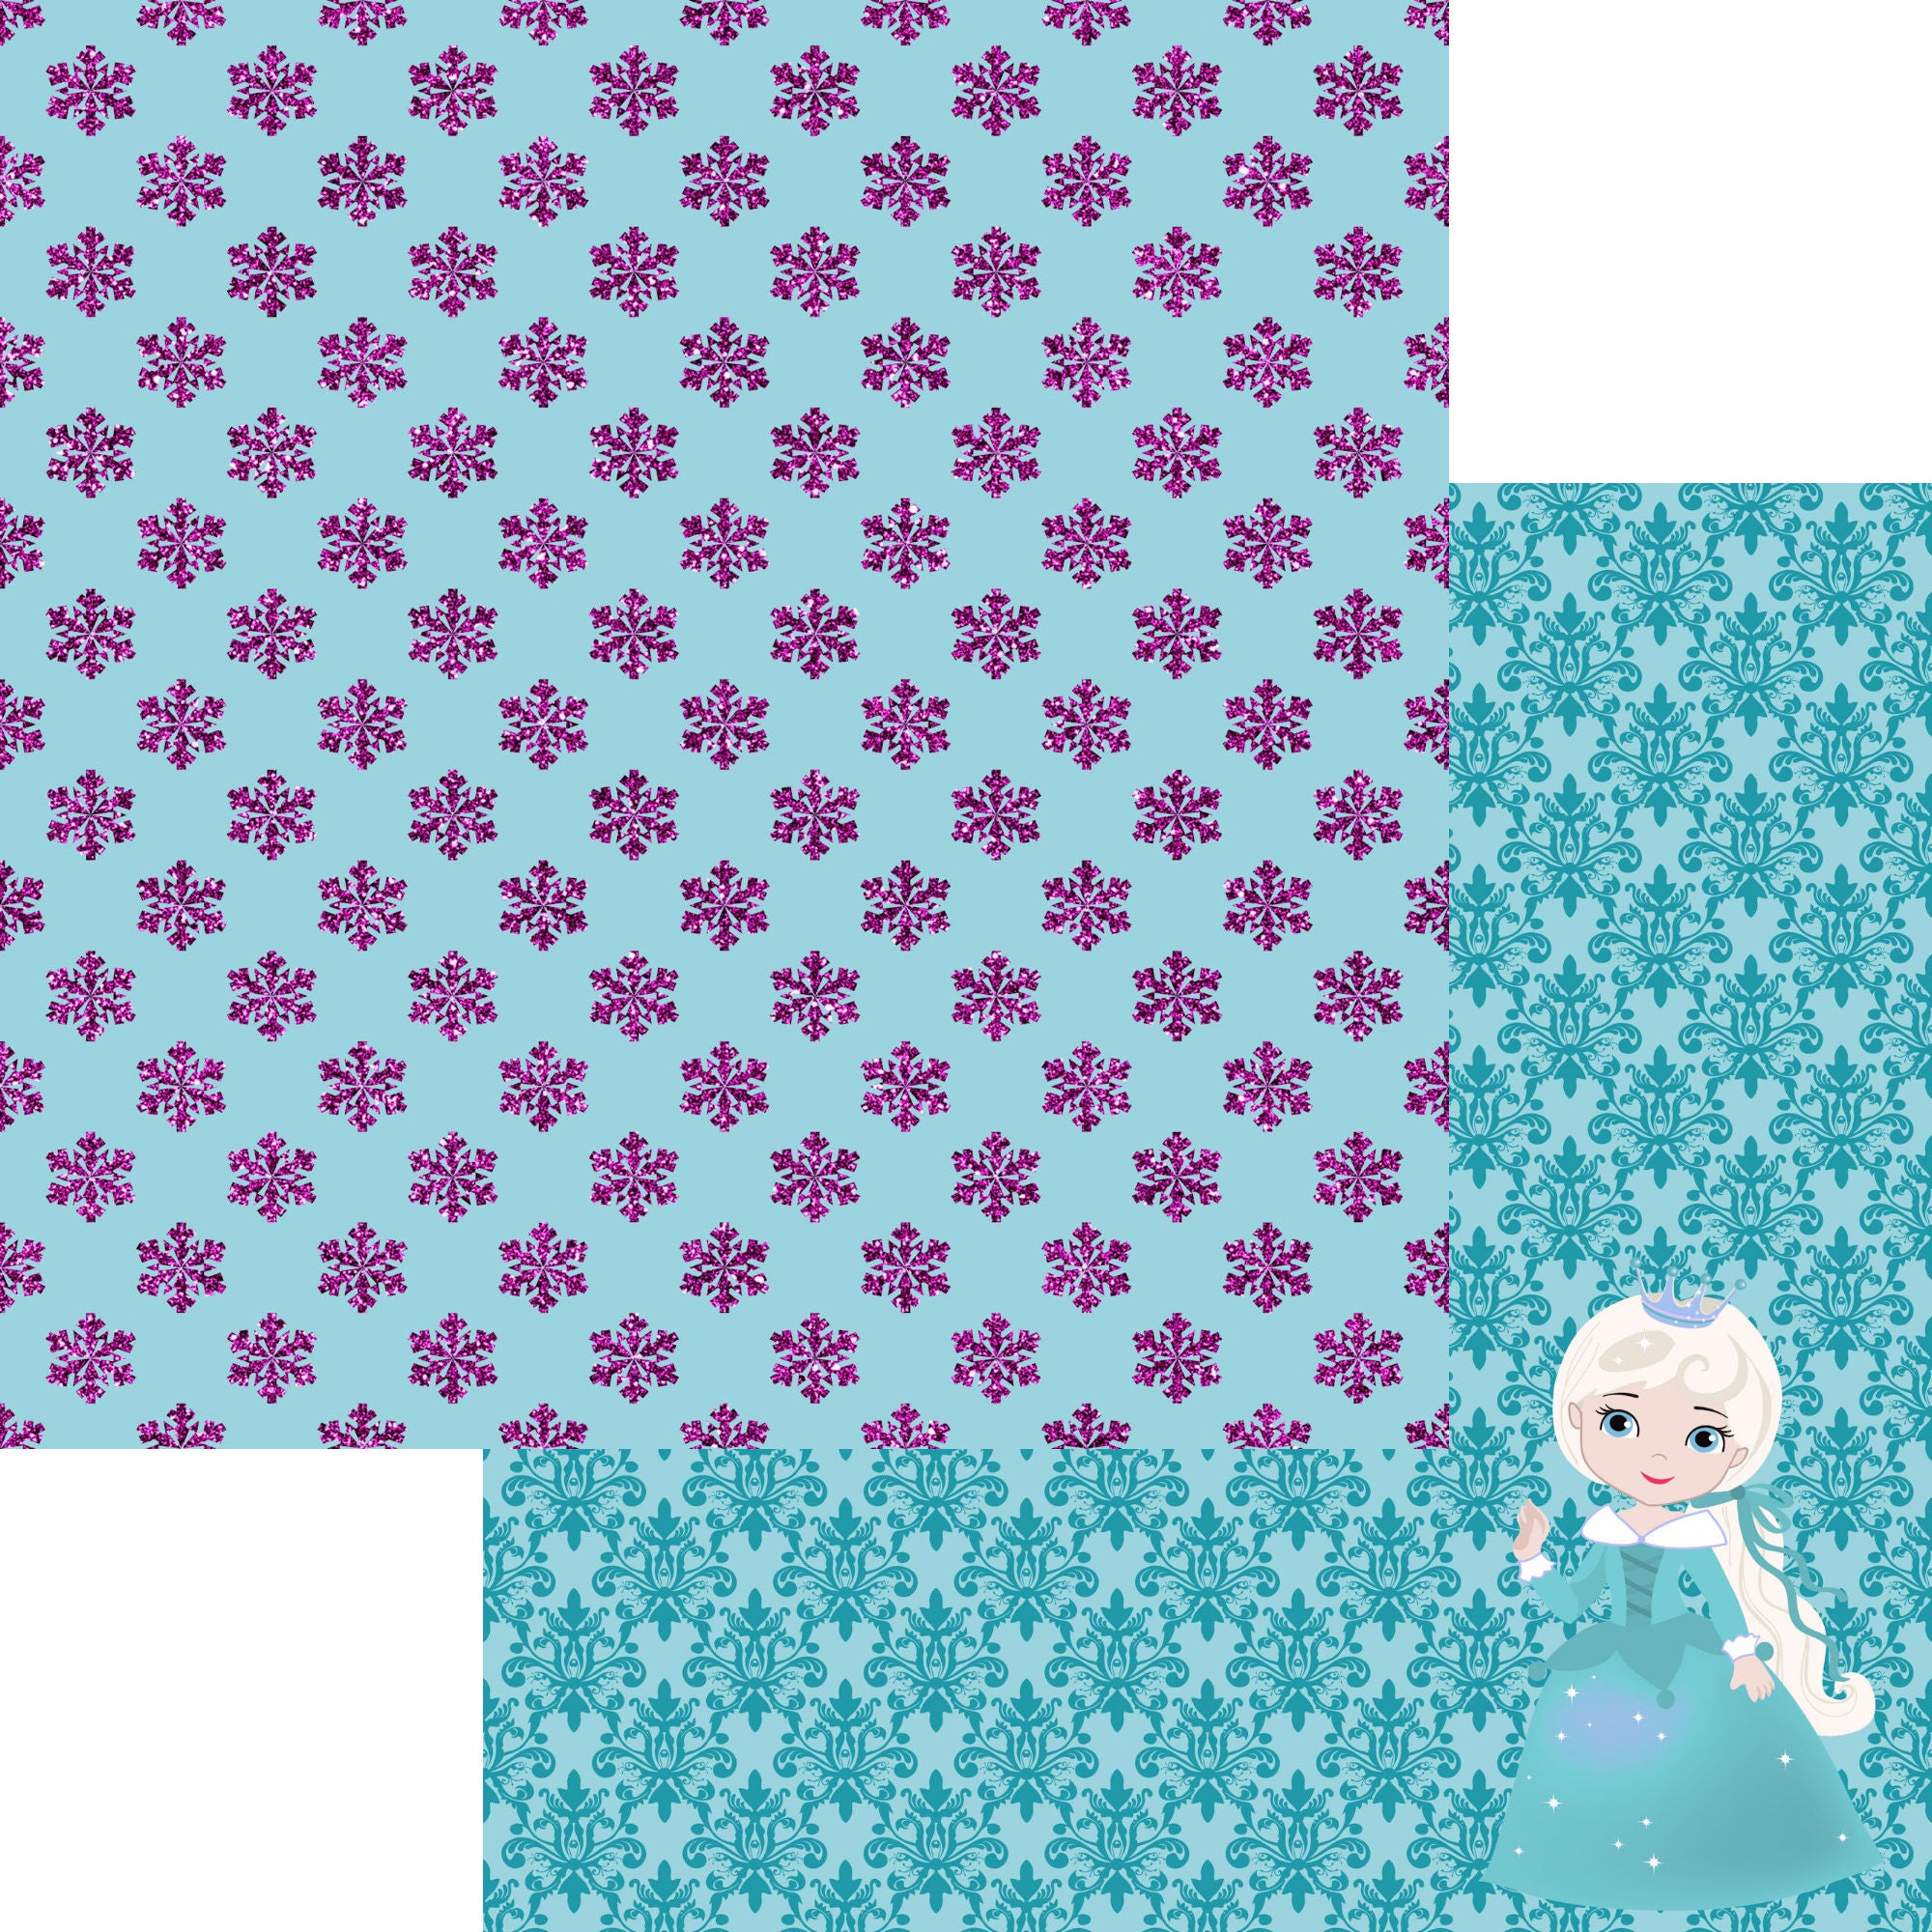 Inspired By Collection Winter Princess 12 x 12 Double-Sided Scrapbook Paper by SSC Designs